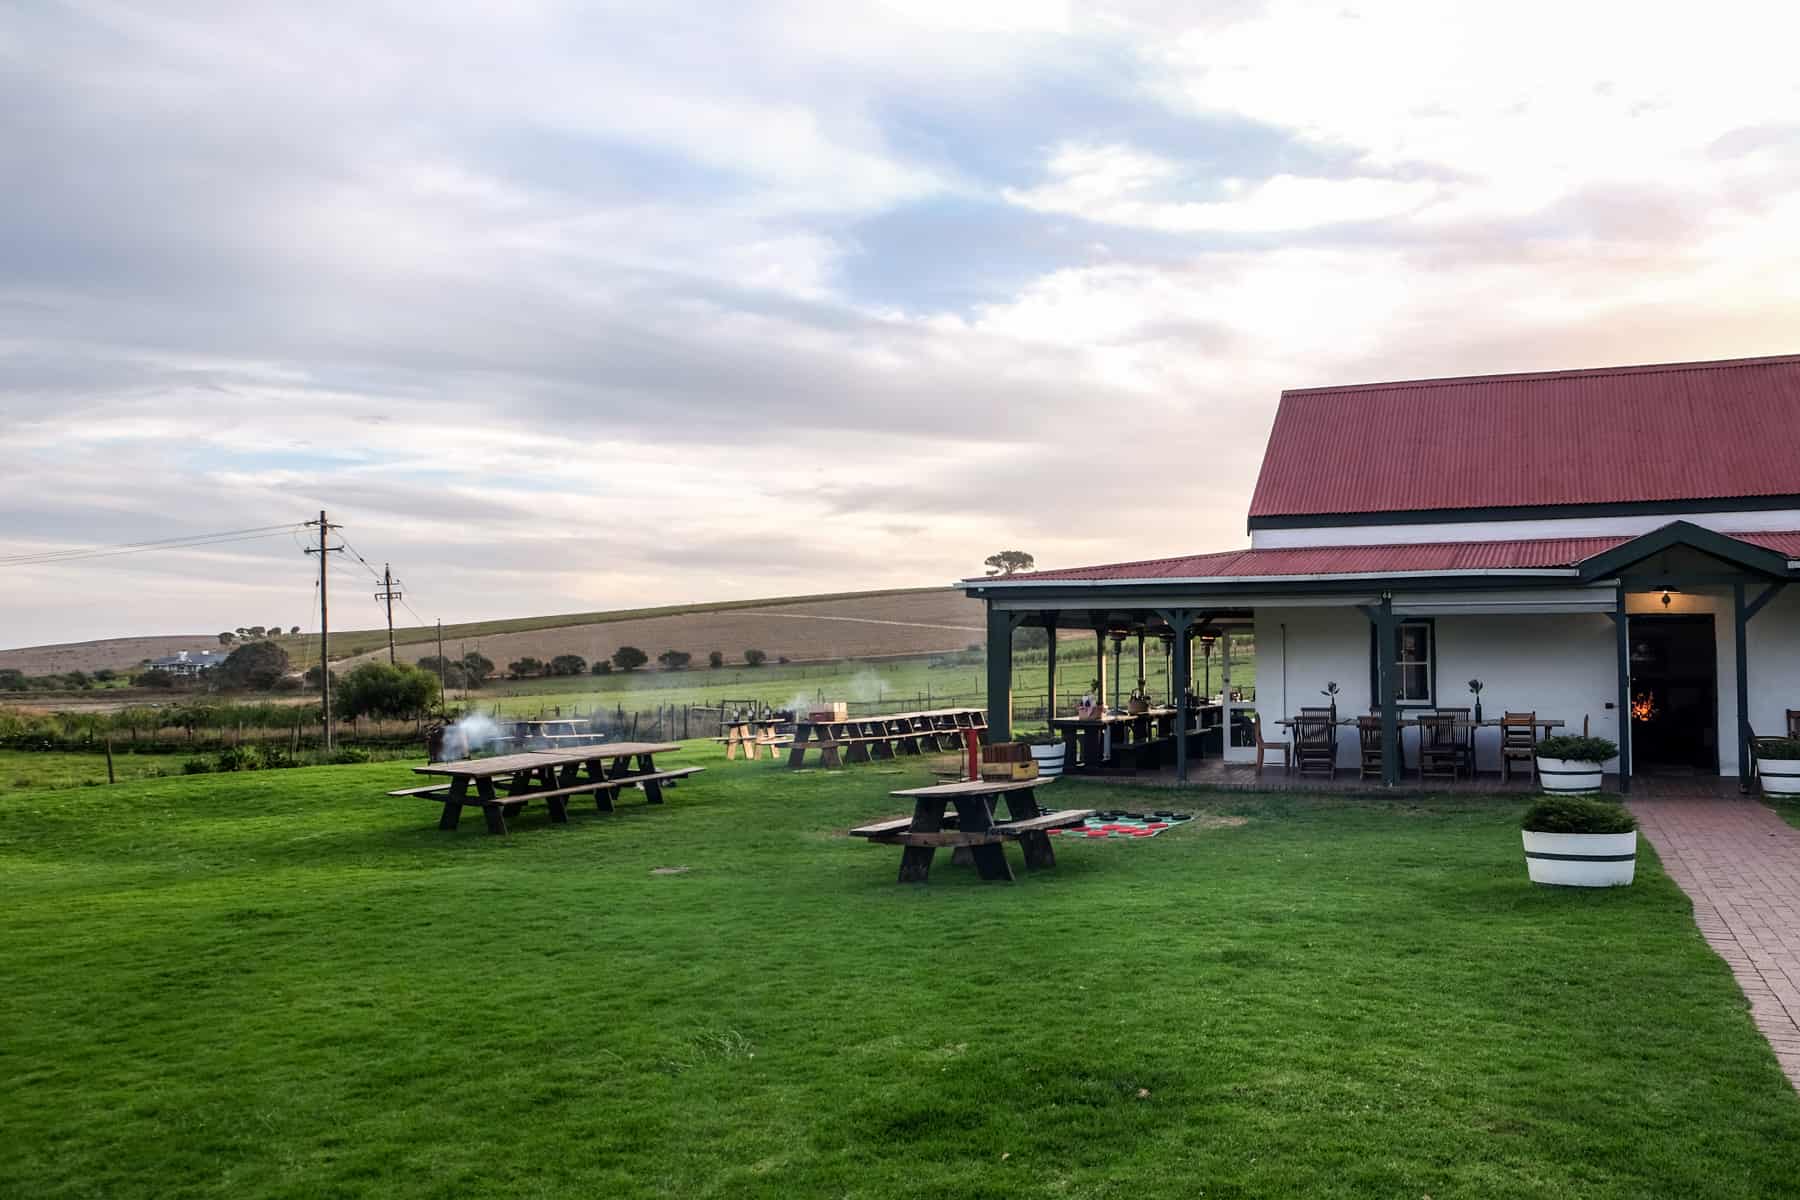 A white house with a red roof stands within a wide green field with brown seat benches and tables - part of the Middelvlei Wine Estate in Stellenbosch